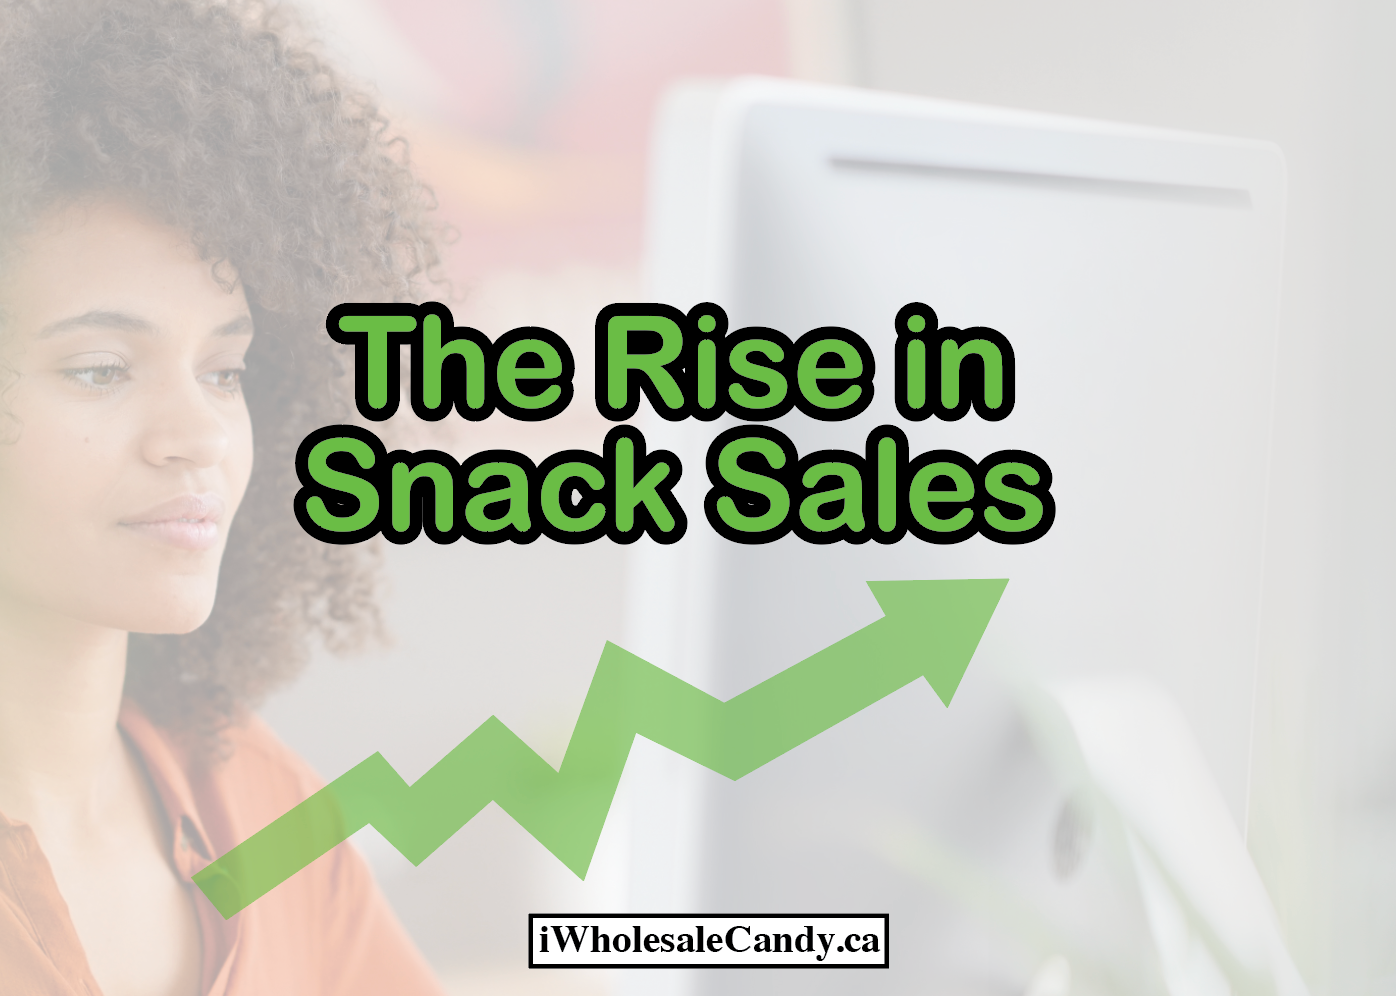 The Rise in Snack Sales